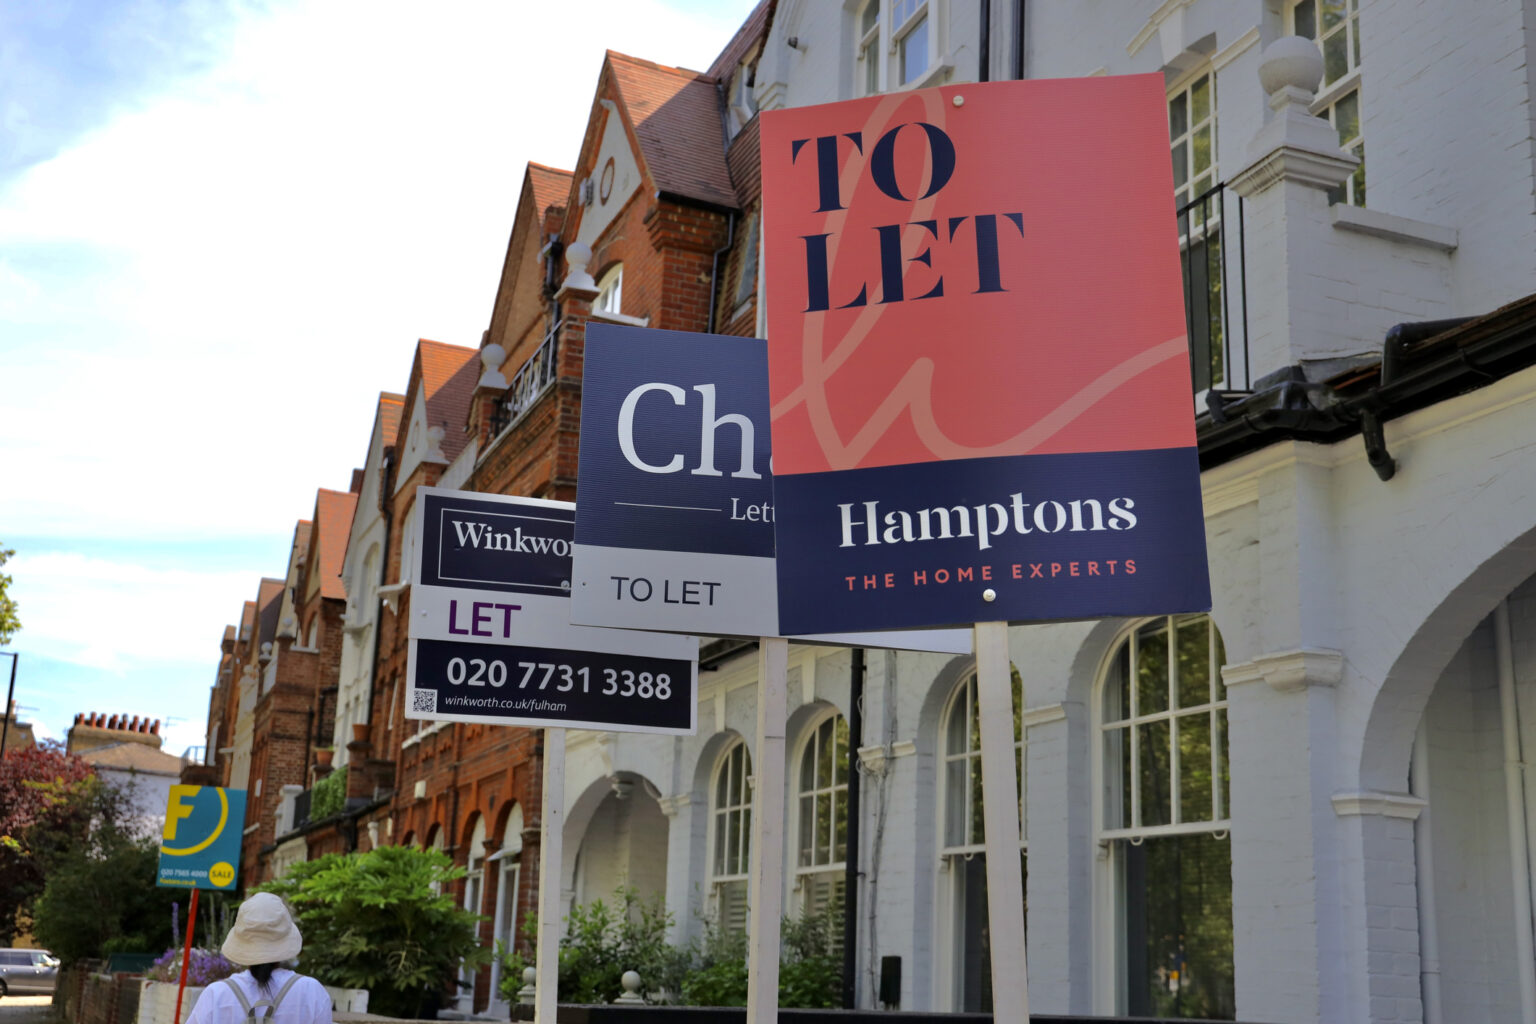 A row of terrace houses in London with 'to let' signs. Rising rents uk rental